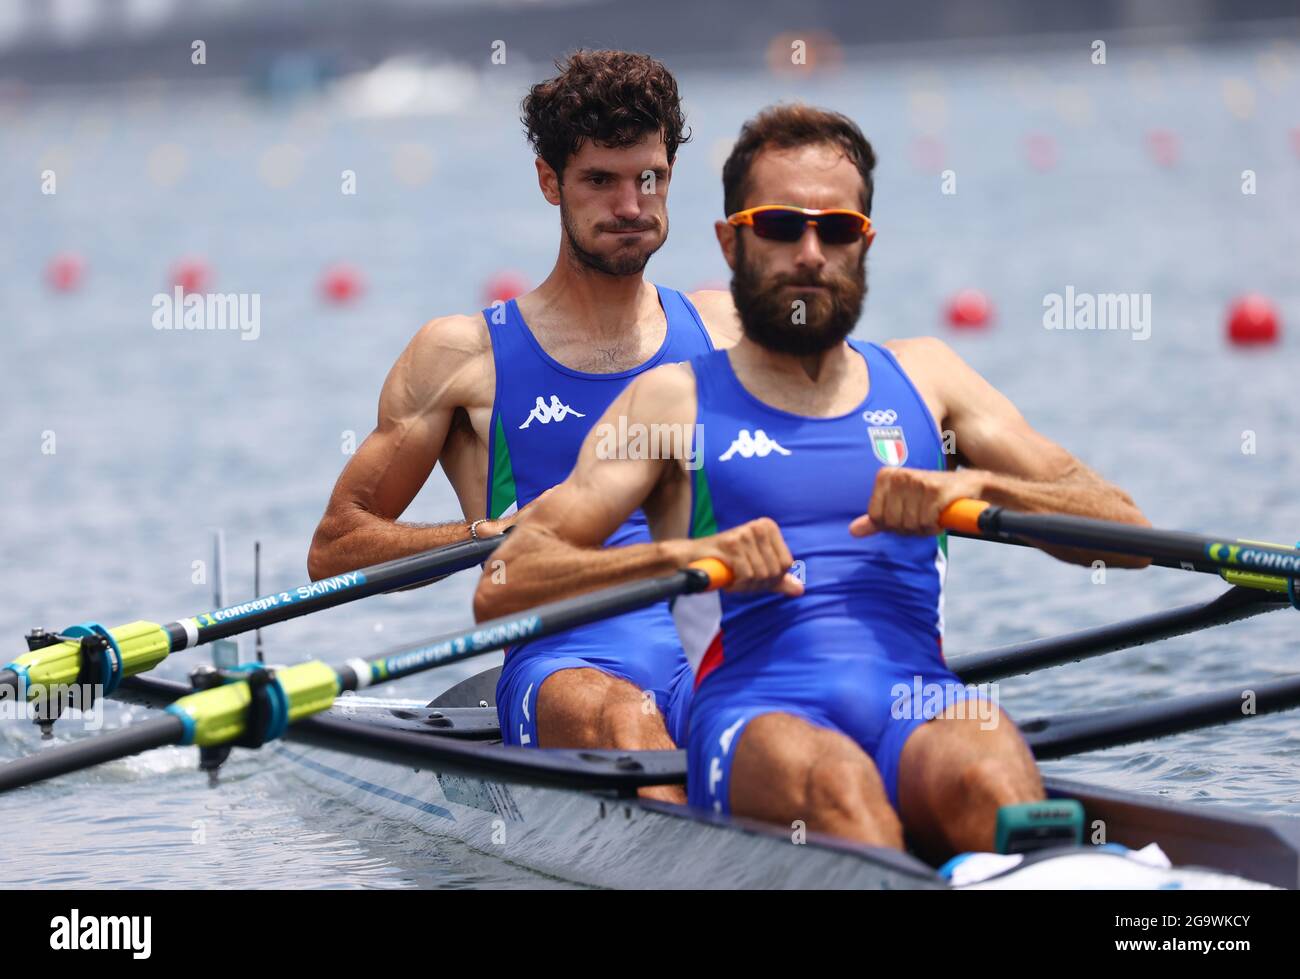 Tokyo 2020 Olympics - Rowing - Men's Lightweight Double Sculls - Semifinal  2 - Sea Forest Waterway, Tokyo, Japan - July 28, 2021. Stefano Oppo of  Italy and Pietro Ruta of Italy in action REUTERS/Leah Millis Stock Photo -  Alamy